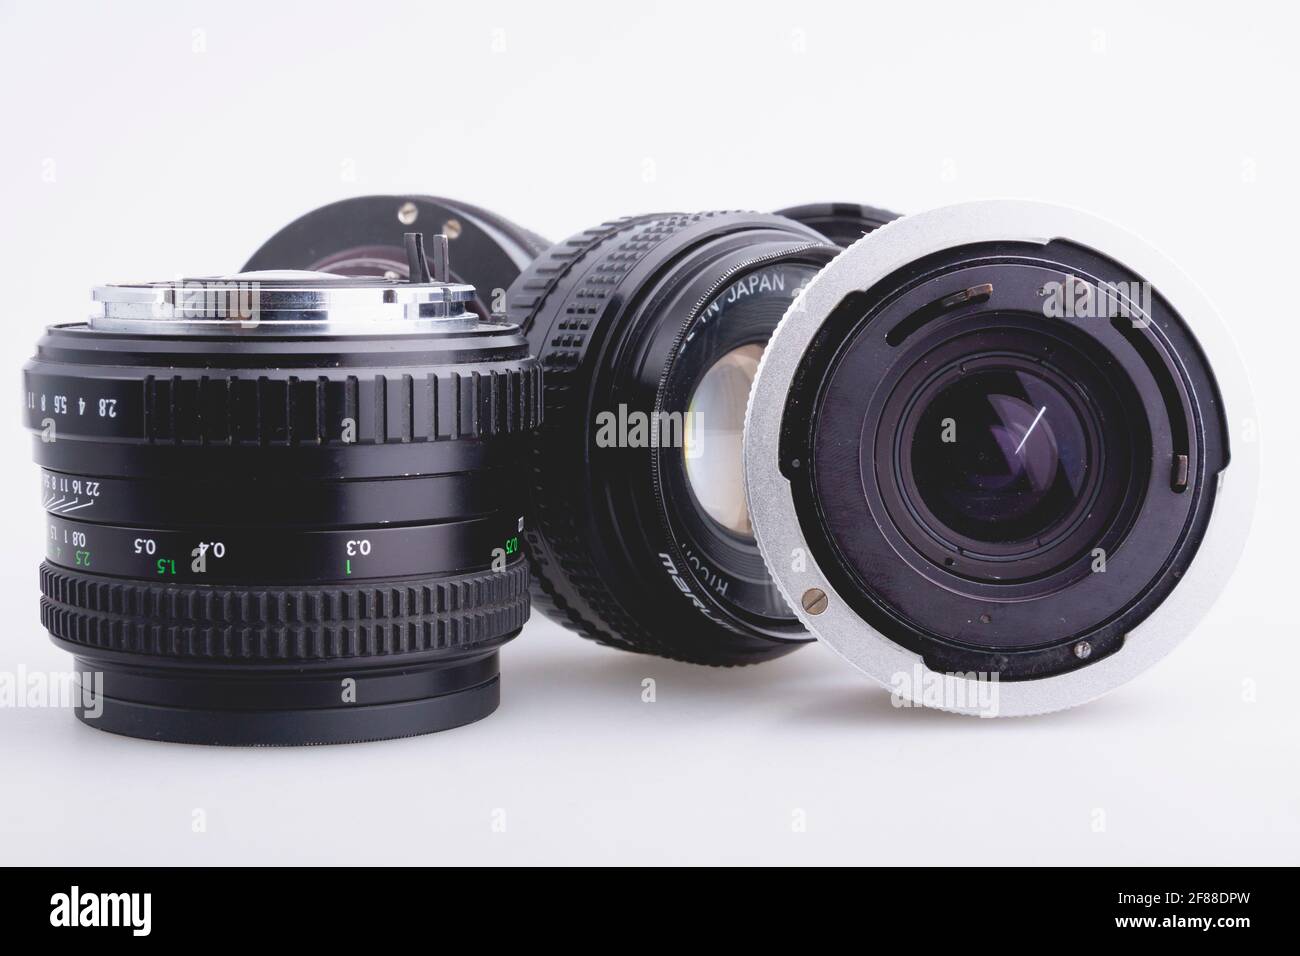 Bilbao, Spain - April 30, 2010: Illustrative editorial photography of a group of old Rikenon lenses from Ricoh and other brands for photo cameras. Tot Stock Photo